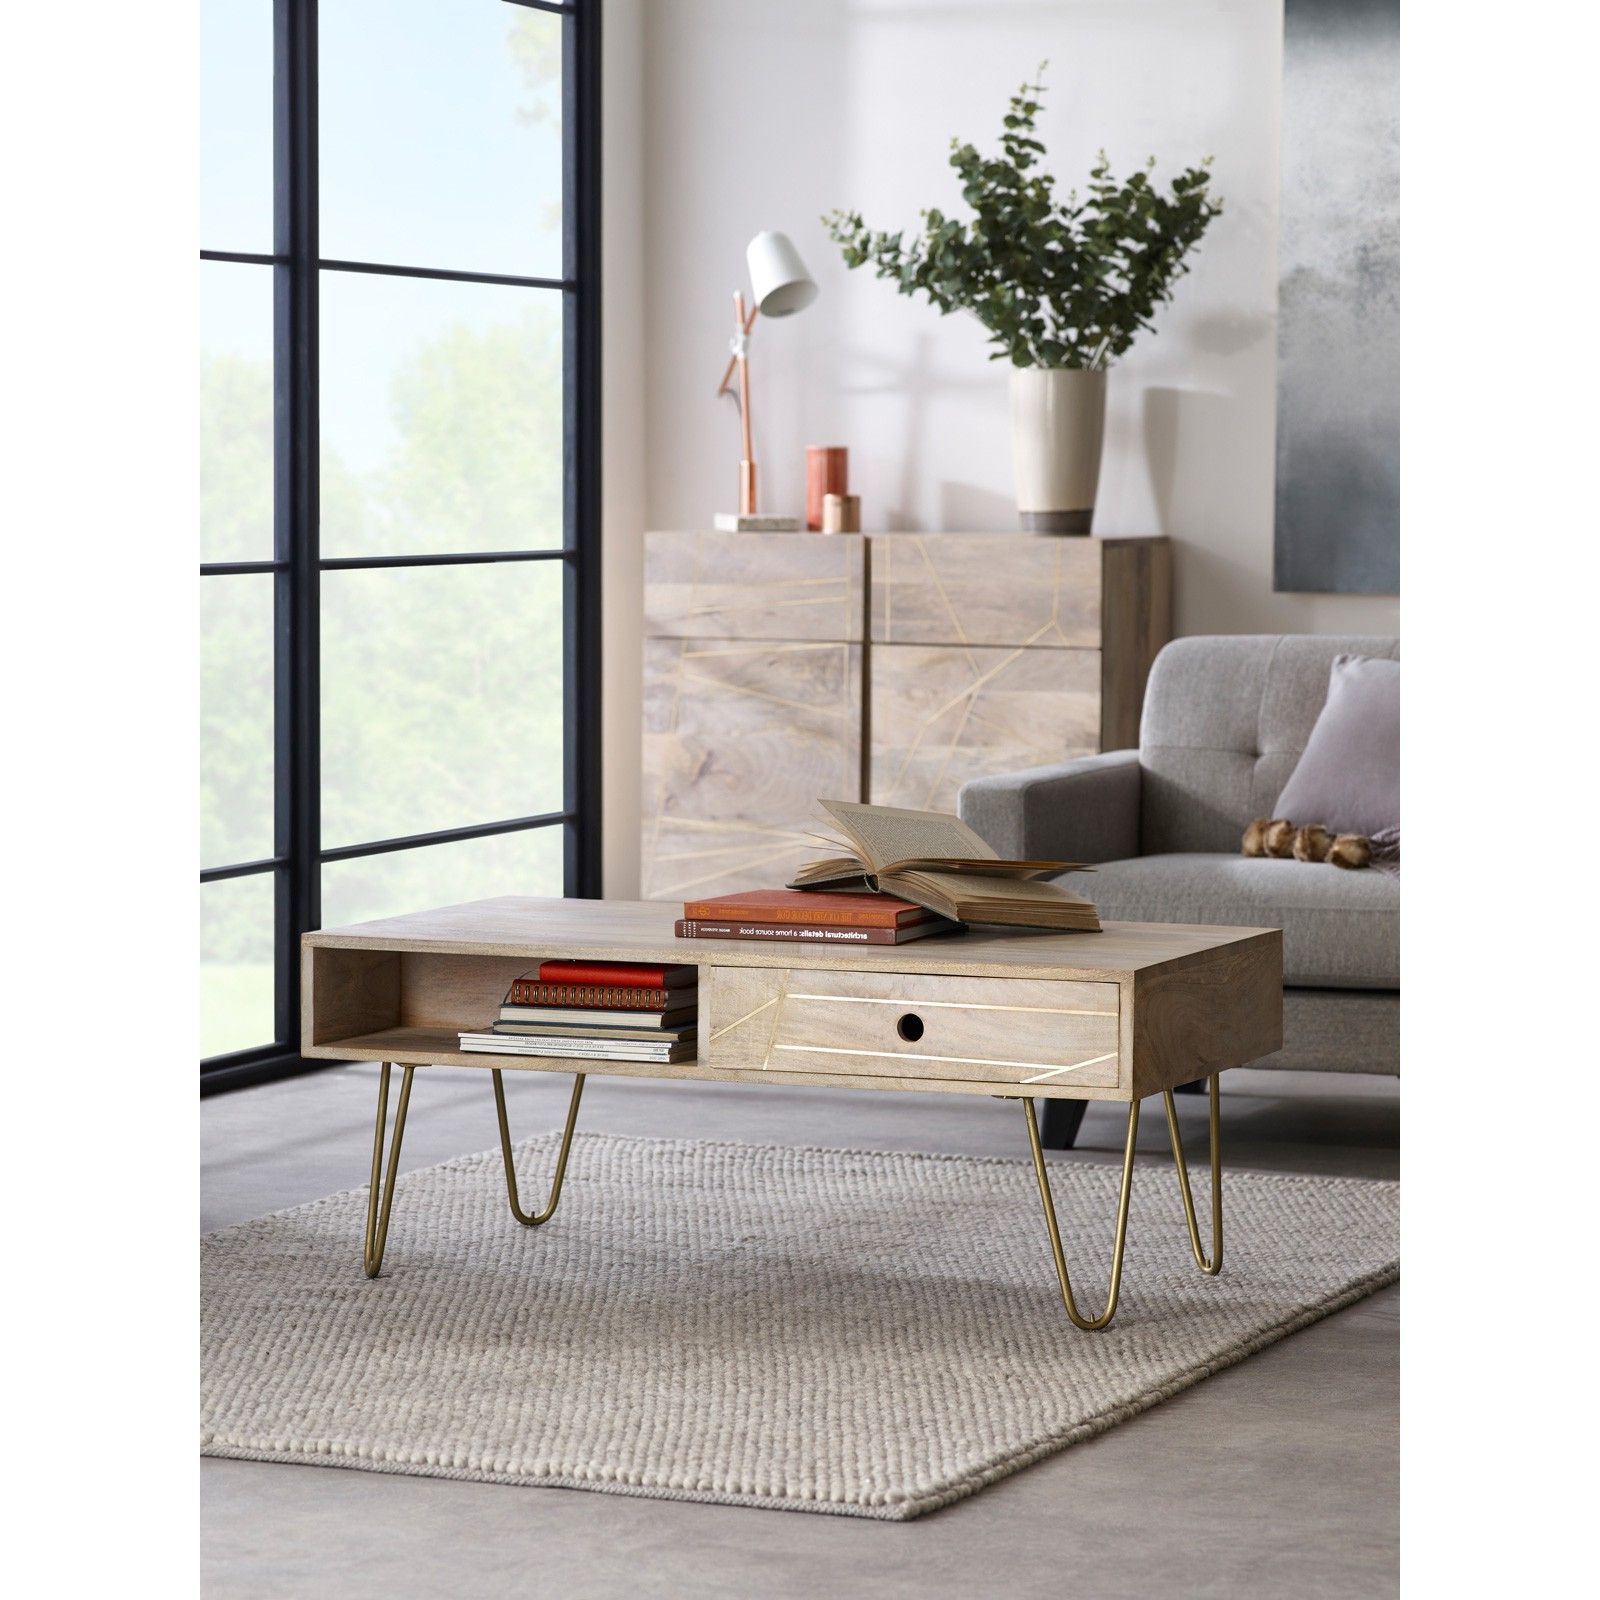 Most Up To Date Light Gold Rectangular Coffee Table With Drawer Regarding Antiqued Gold Rectangular Coffee Tables (View 8 of 20)